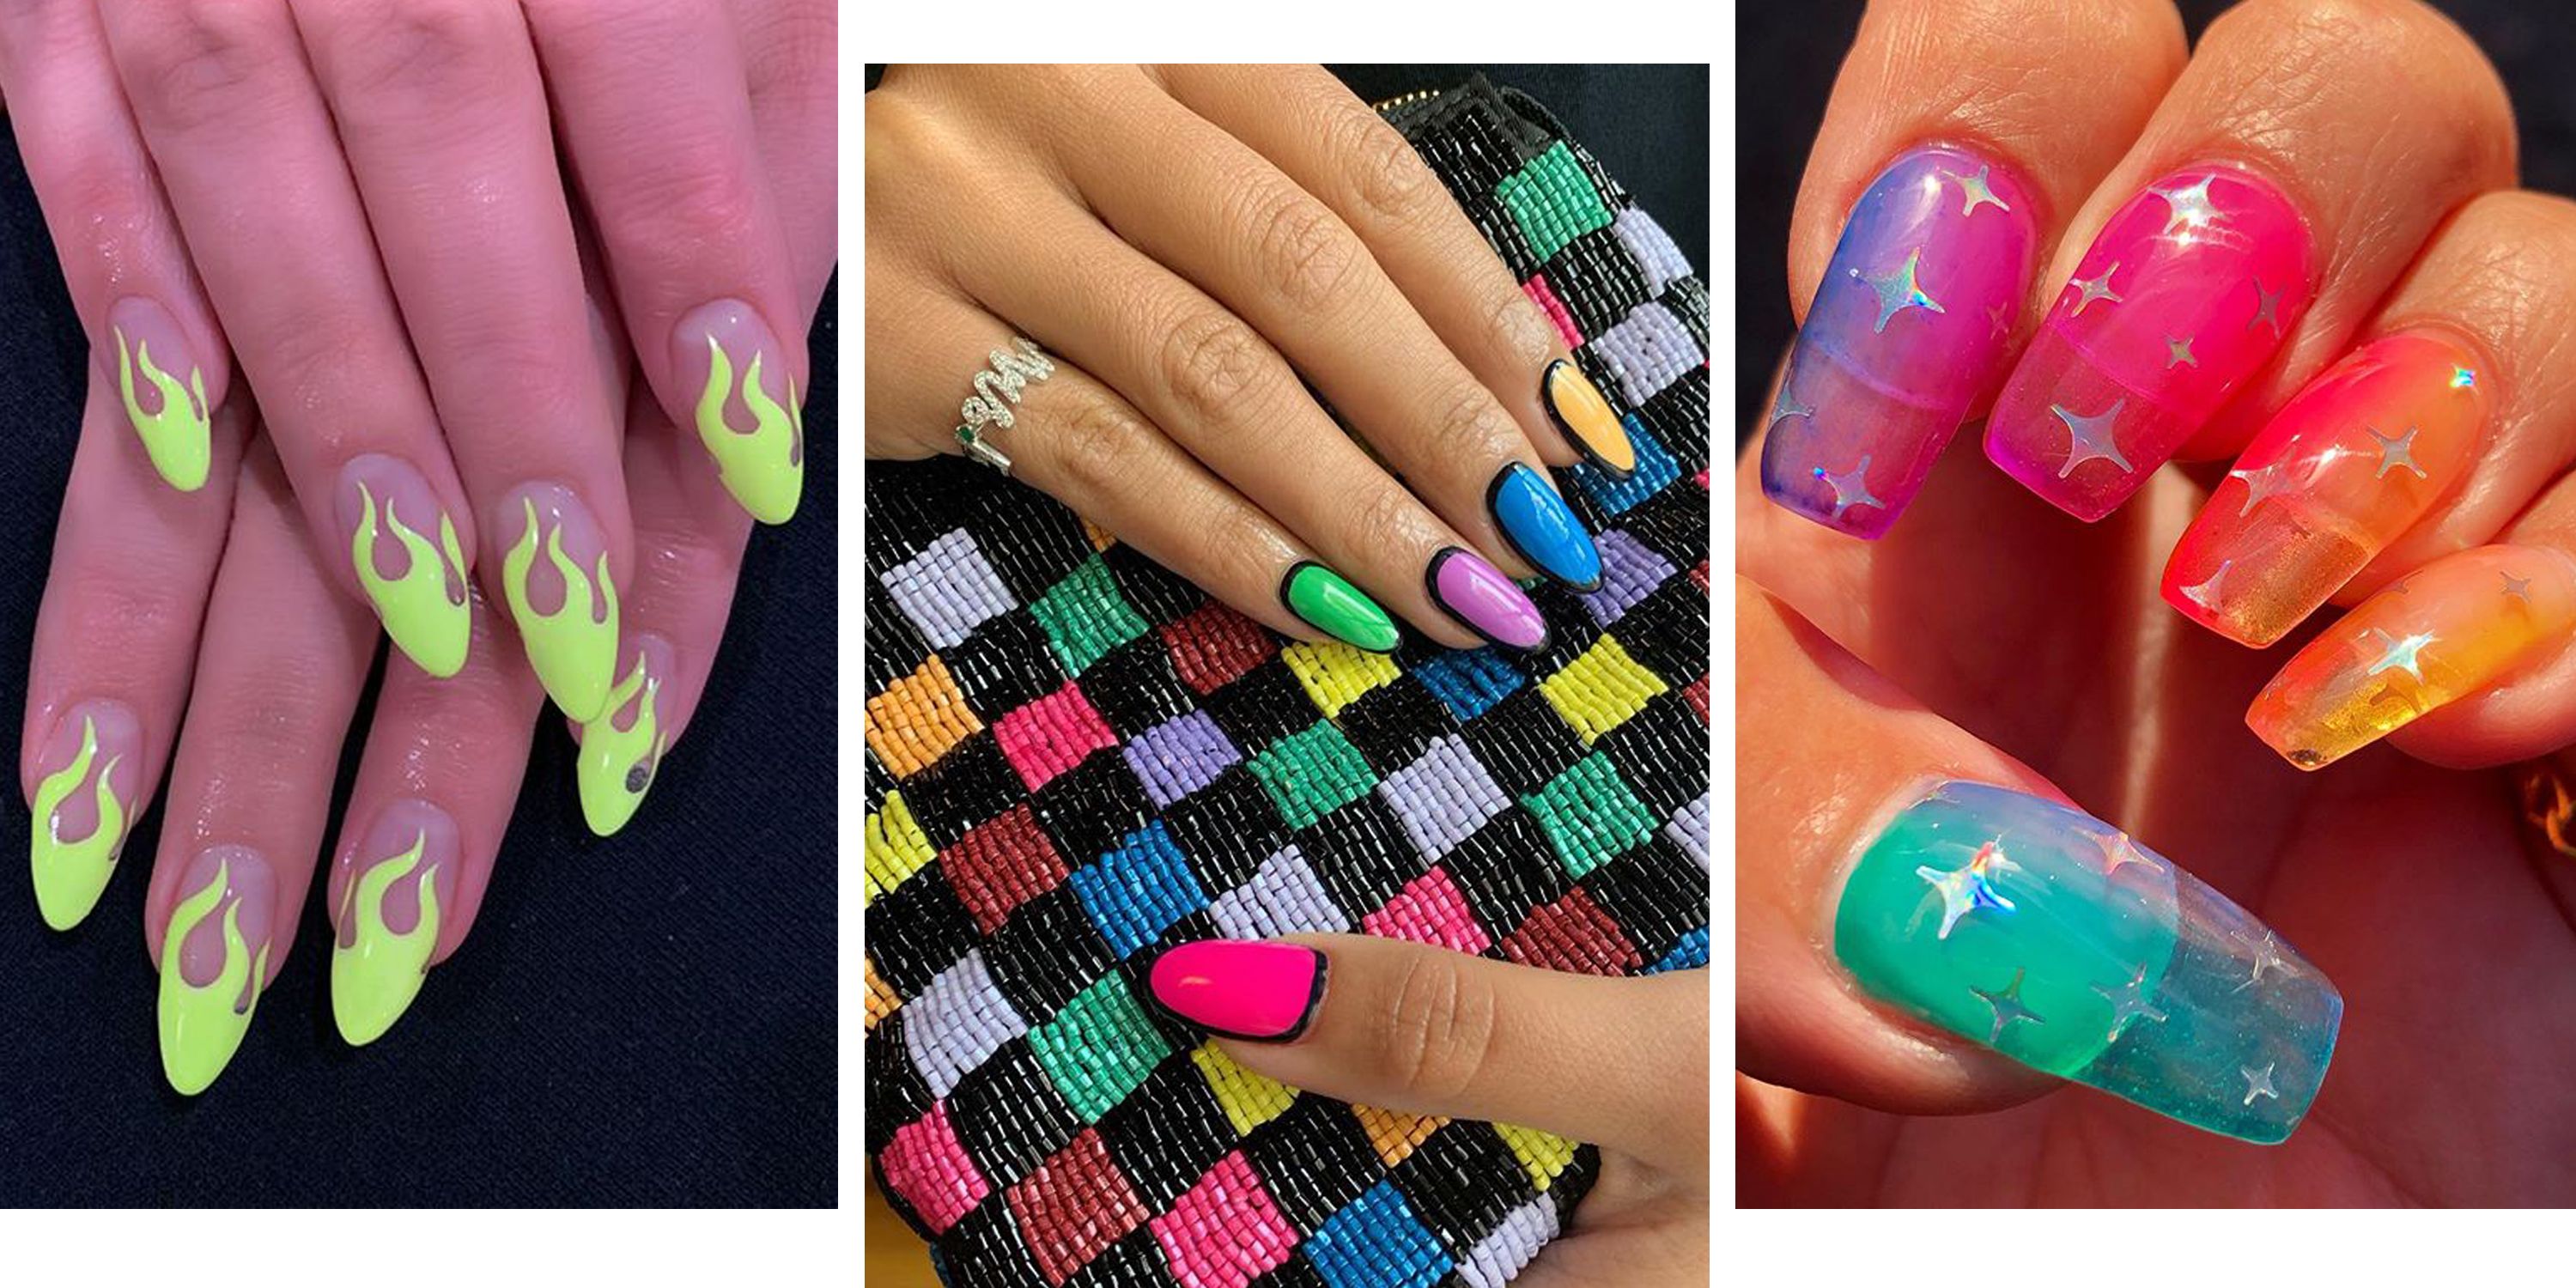 Get Glastonbury-ready with these 25 fun festival nail styles - Scratch  Magazine